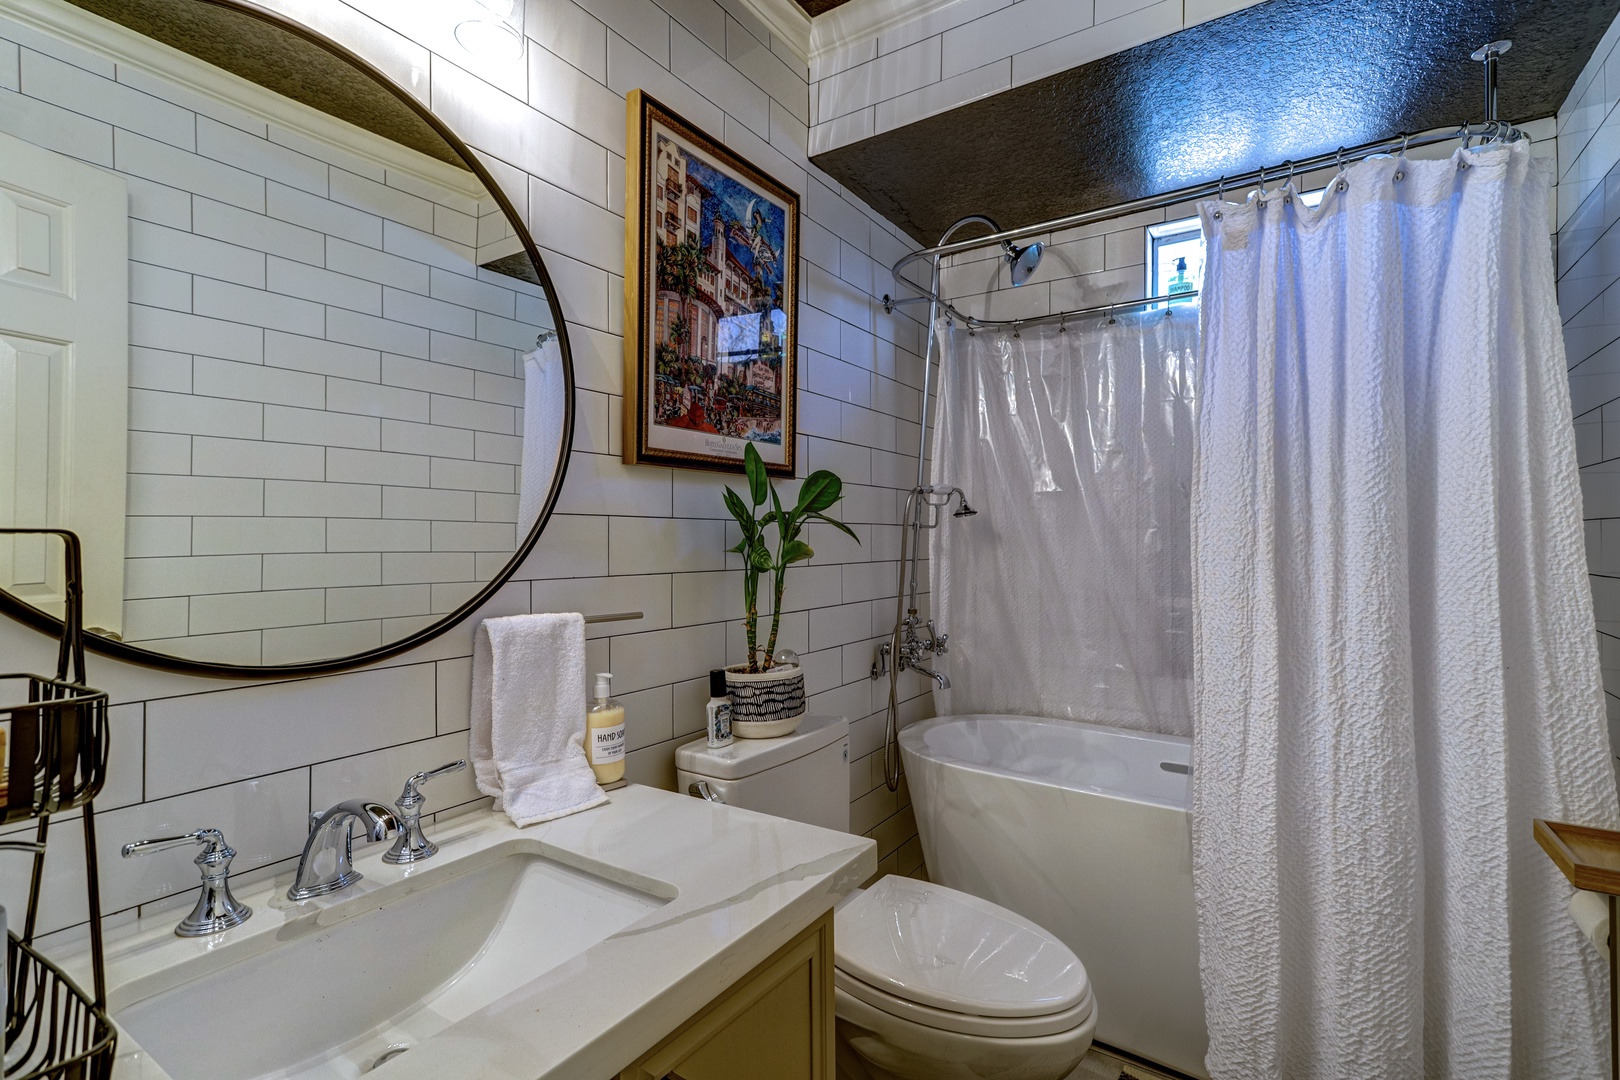 The 2nd-floor full bath includes a single vanity & shower/soaking tub combo